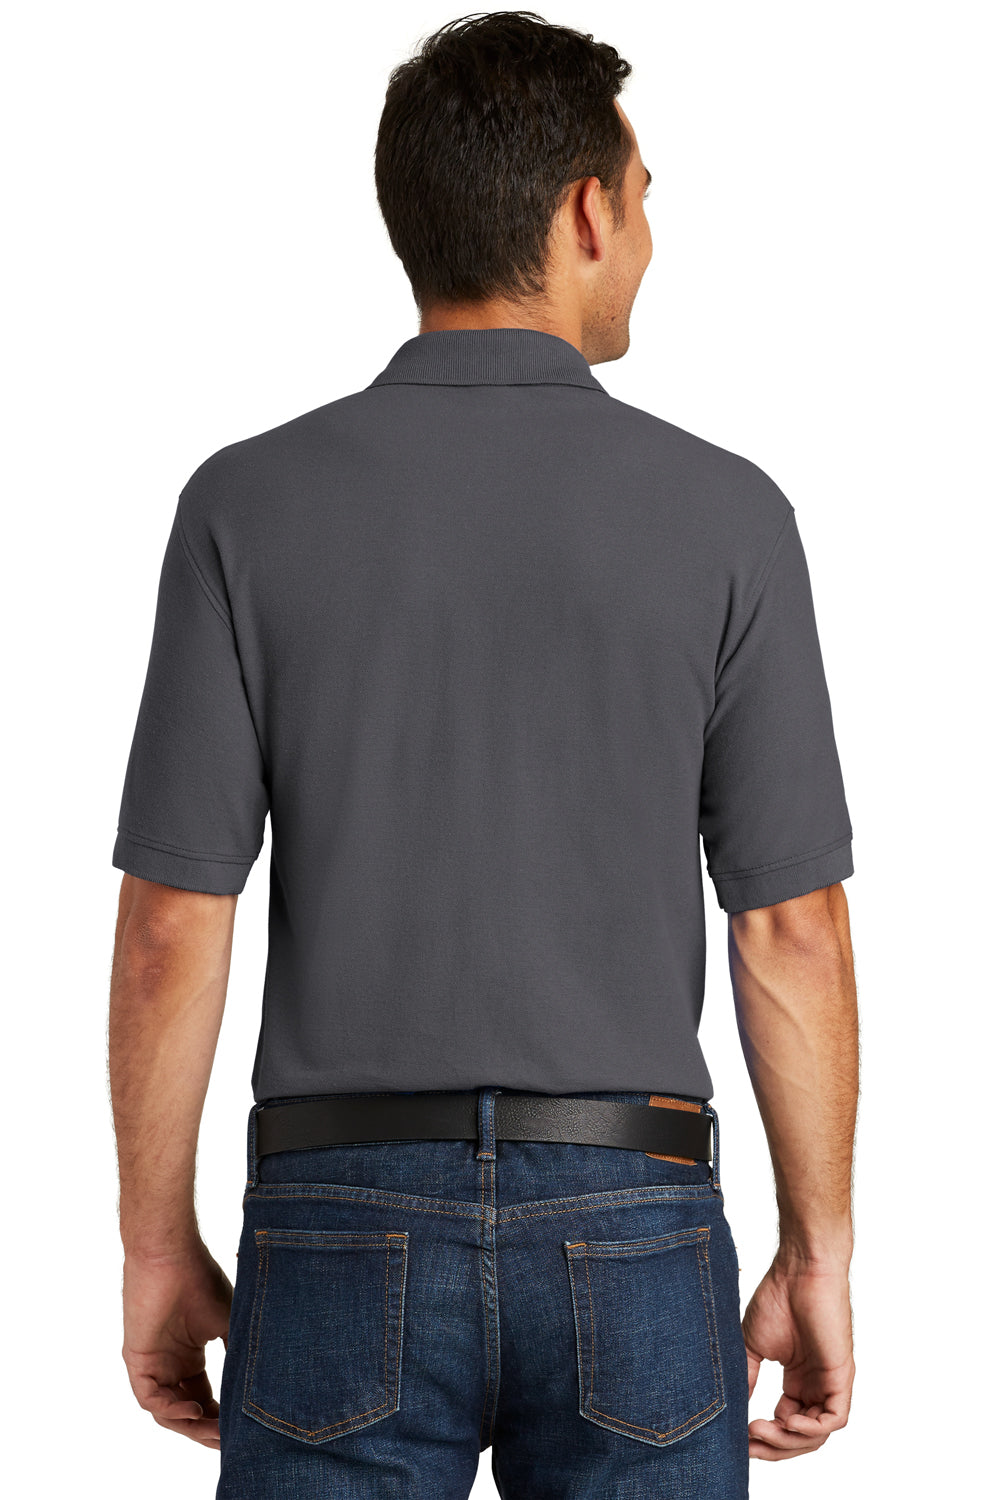 Port & Company KP155 Mens Core Stain Resistant Short Sleeve Polo Shirt Charcoal Grey Back